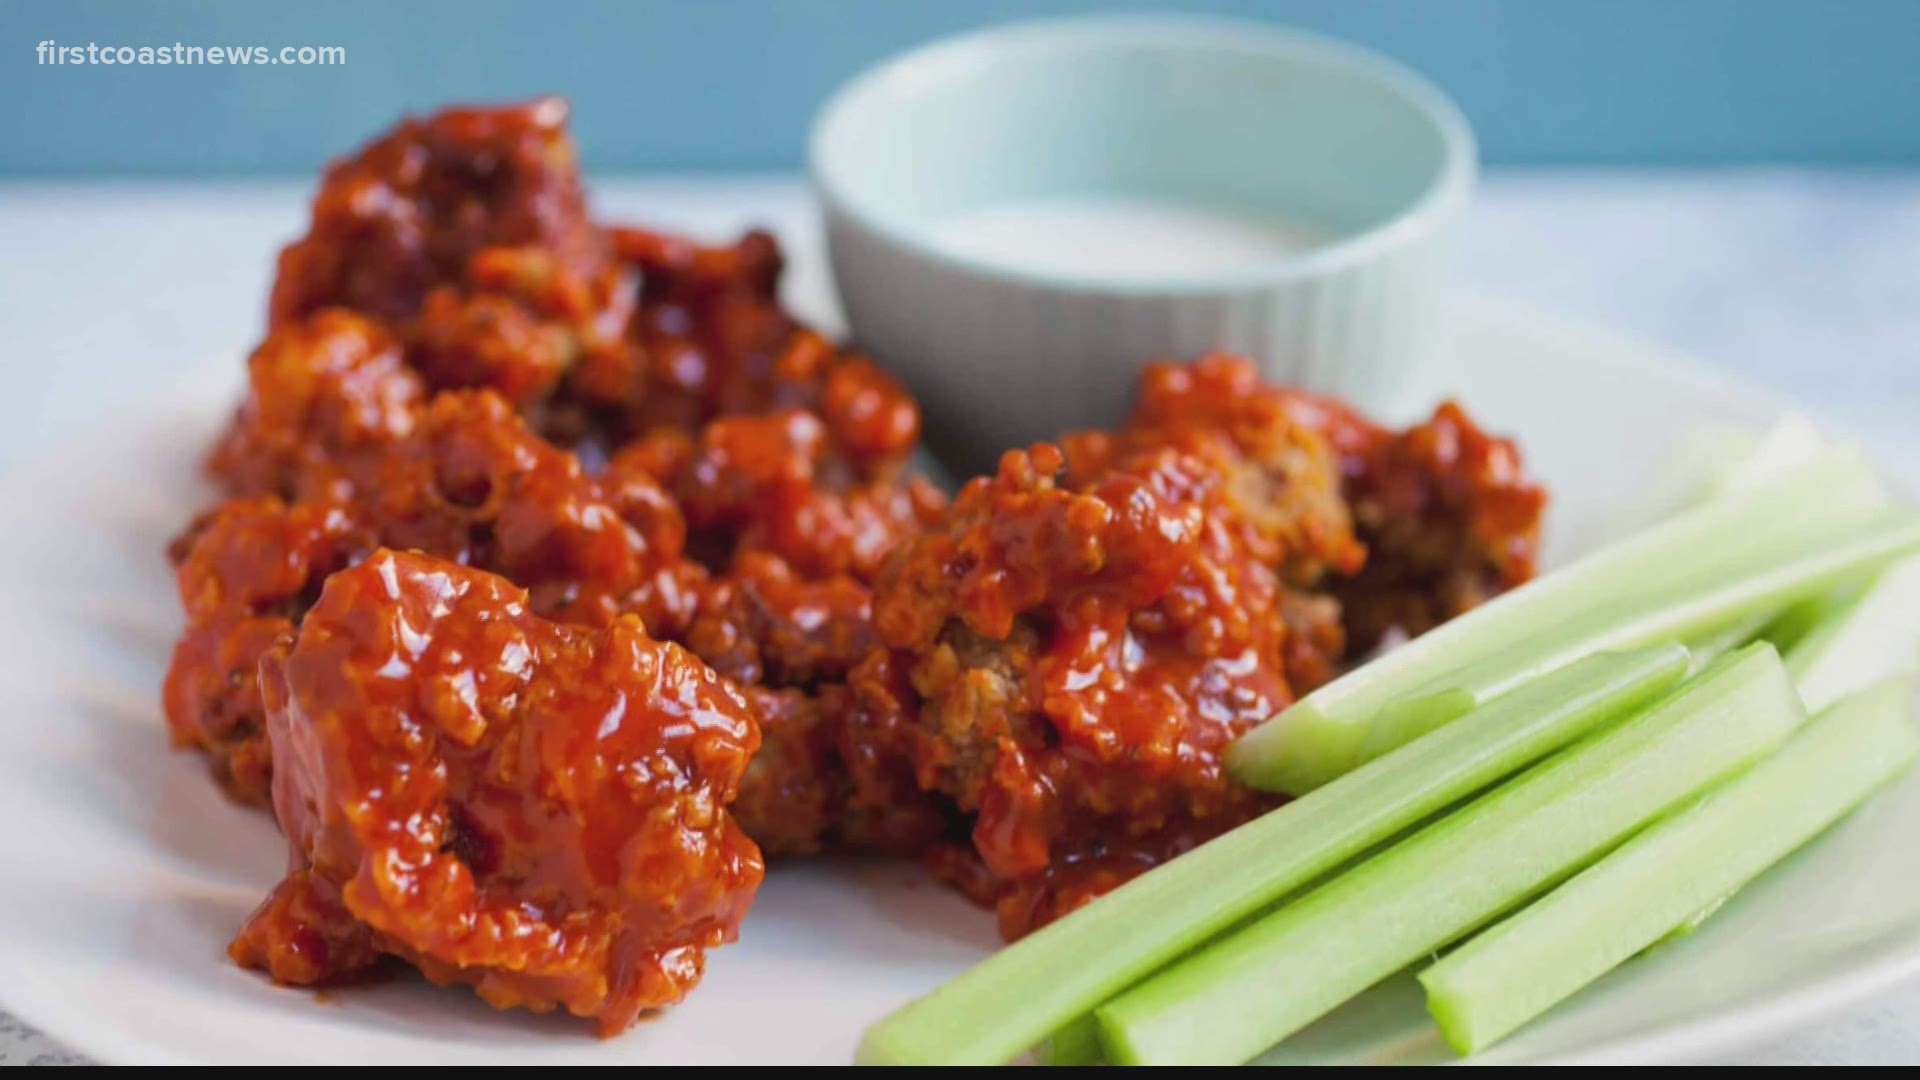 Some businesses that usually sell chicken wings are resorting to selling boneless due to the shortage.